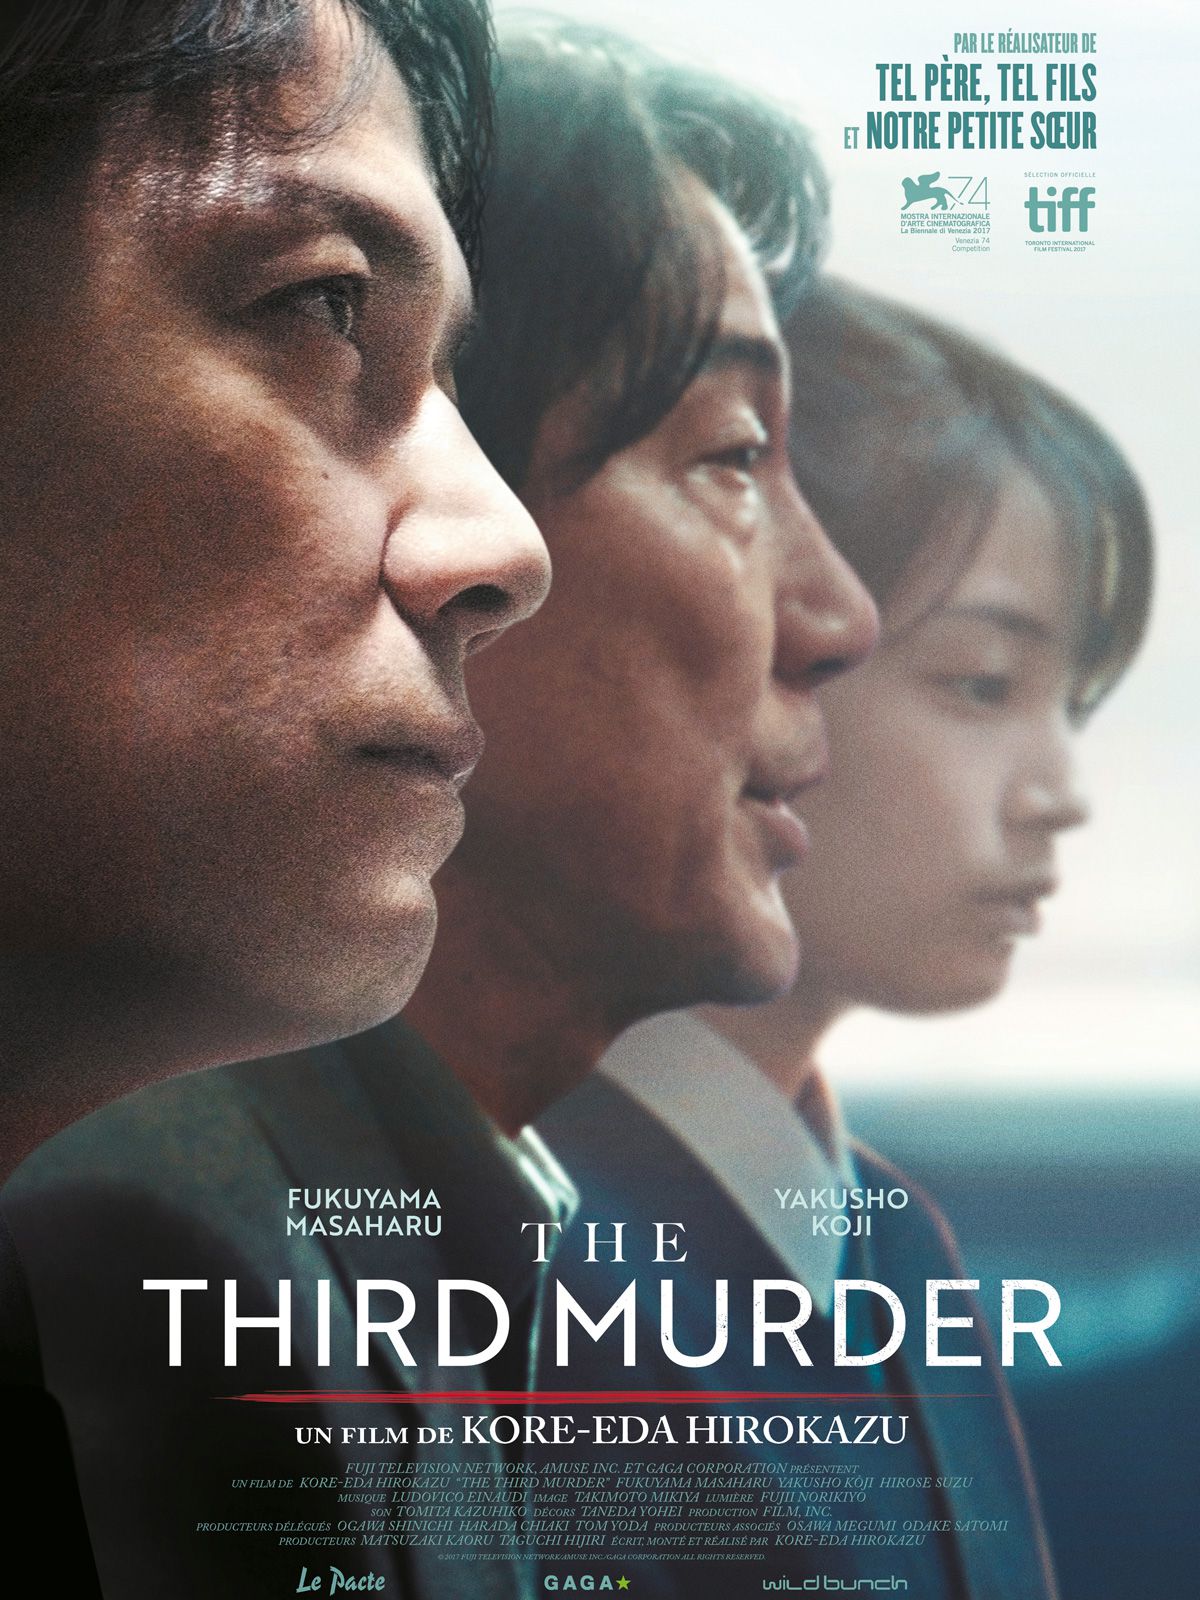 The Third Murder - Film (2018) streaming VF gratuit complet